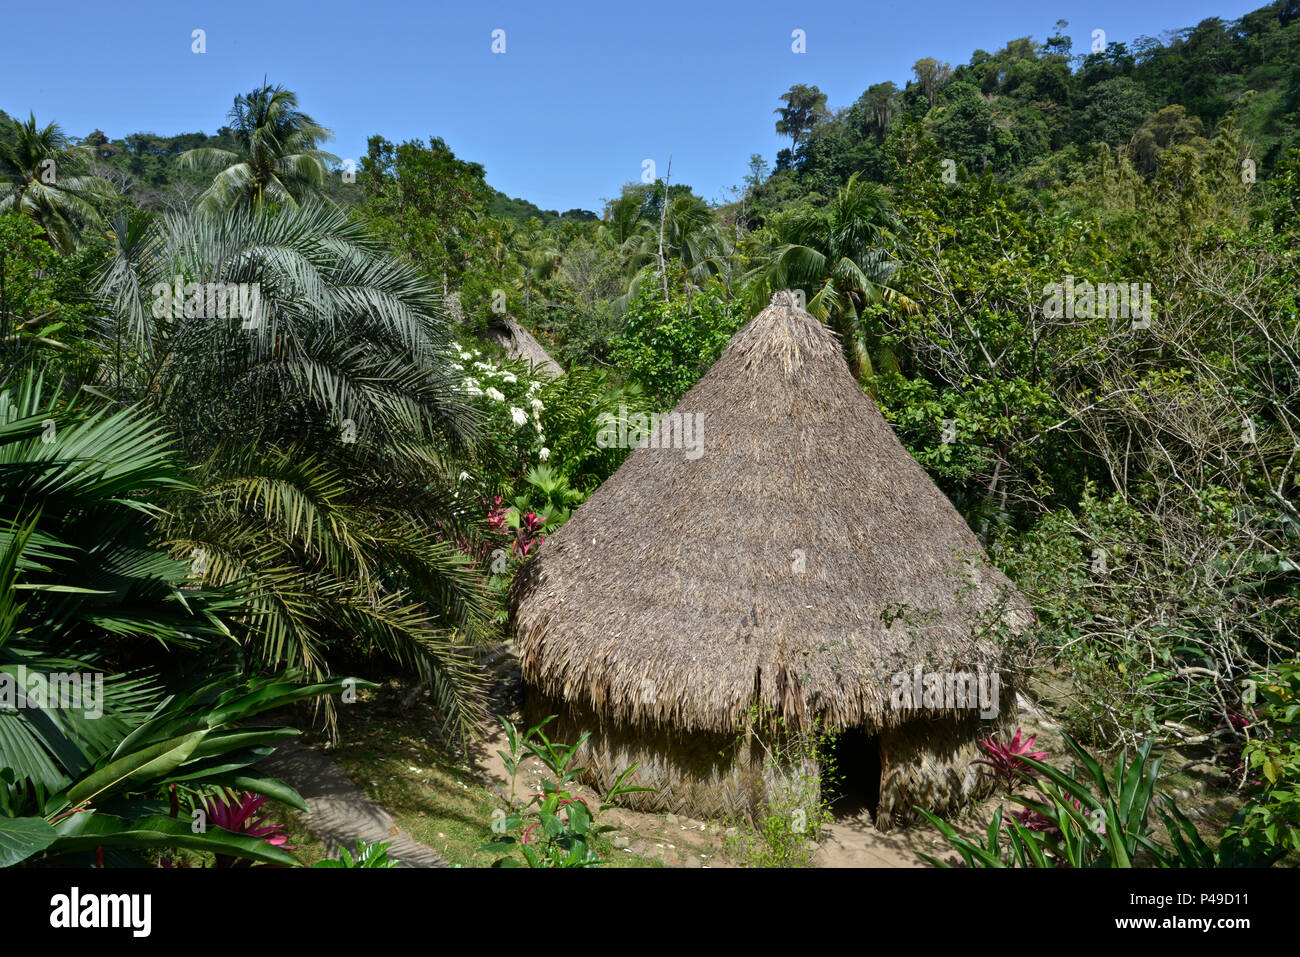 Kogui Huts are build in a series of villages containing circular huts made of stone, mud, and palm leaves.The Sierra Nevada de Santa Marta is home to  Stock Photo